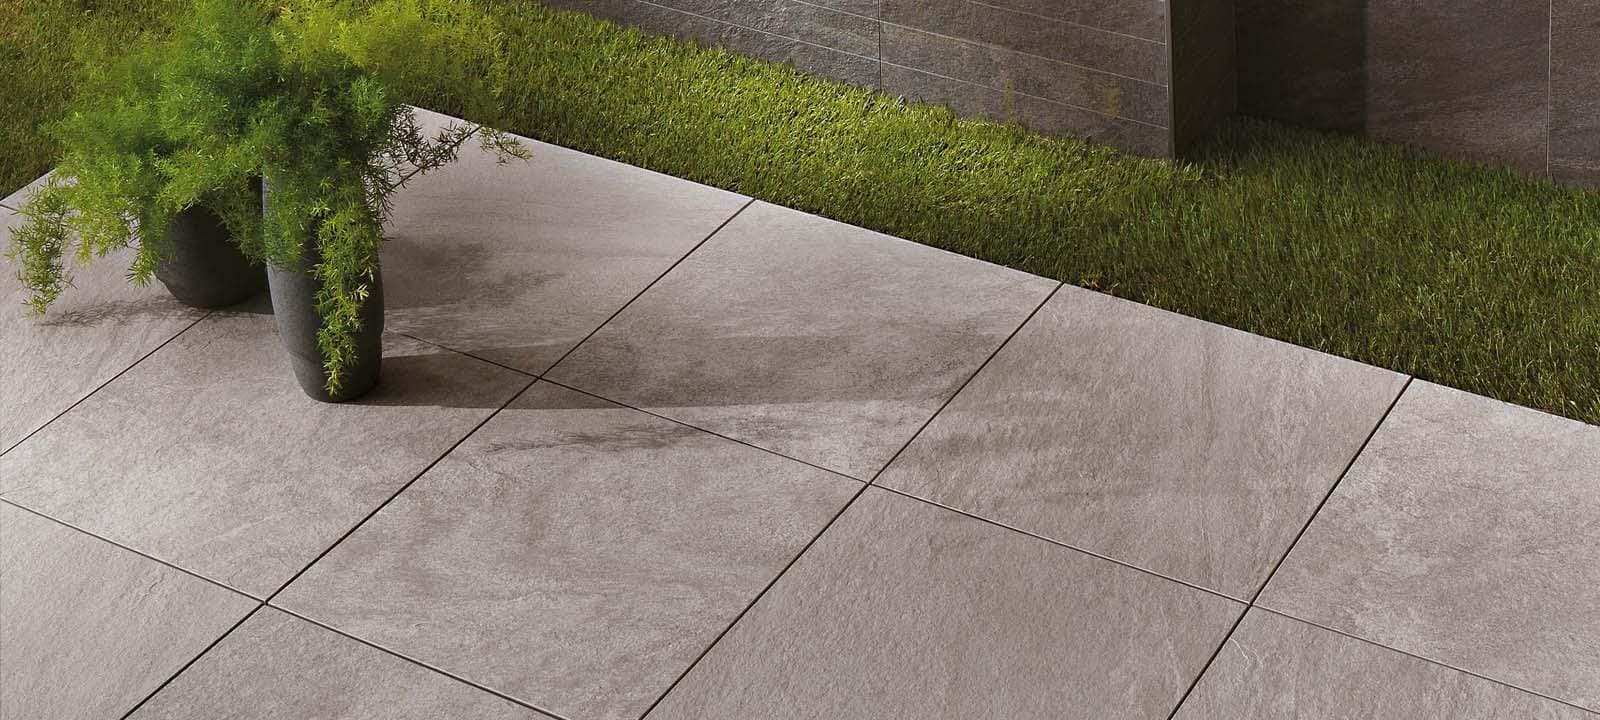 Bravestone Outdoor – Pearl 20mm - Hyperion Tiles